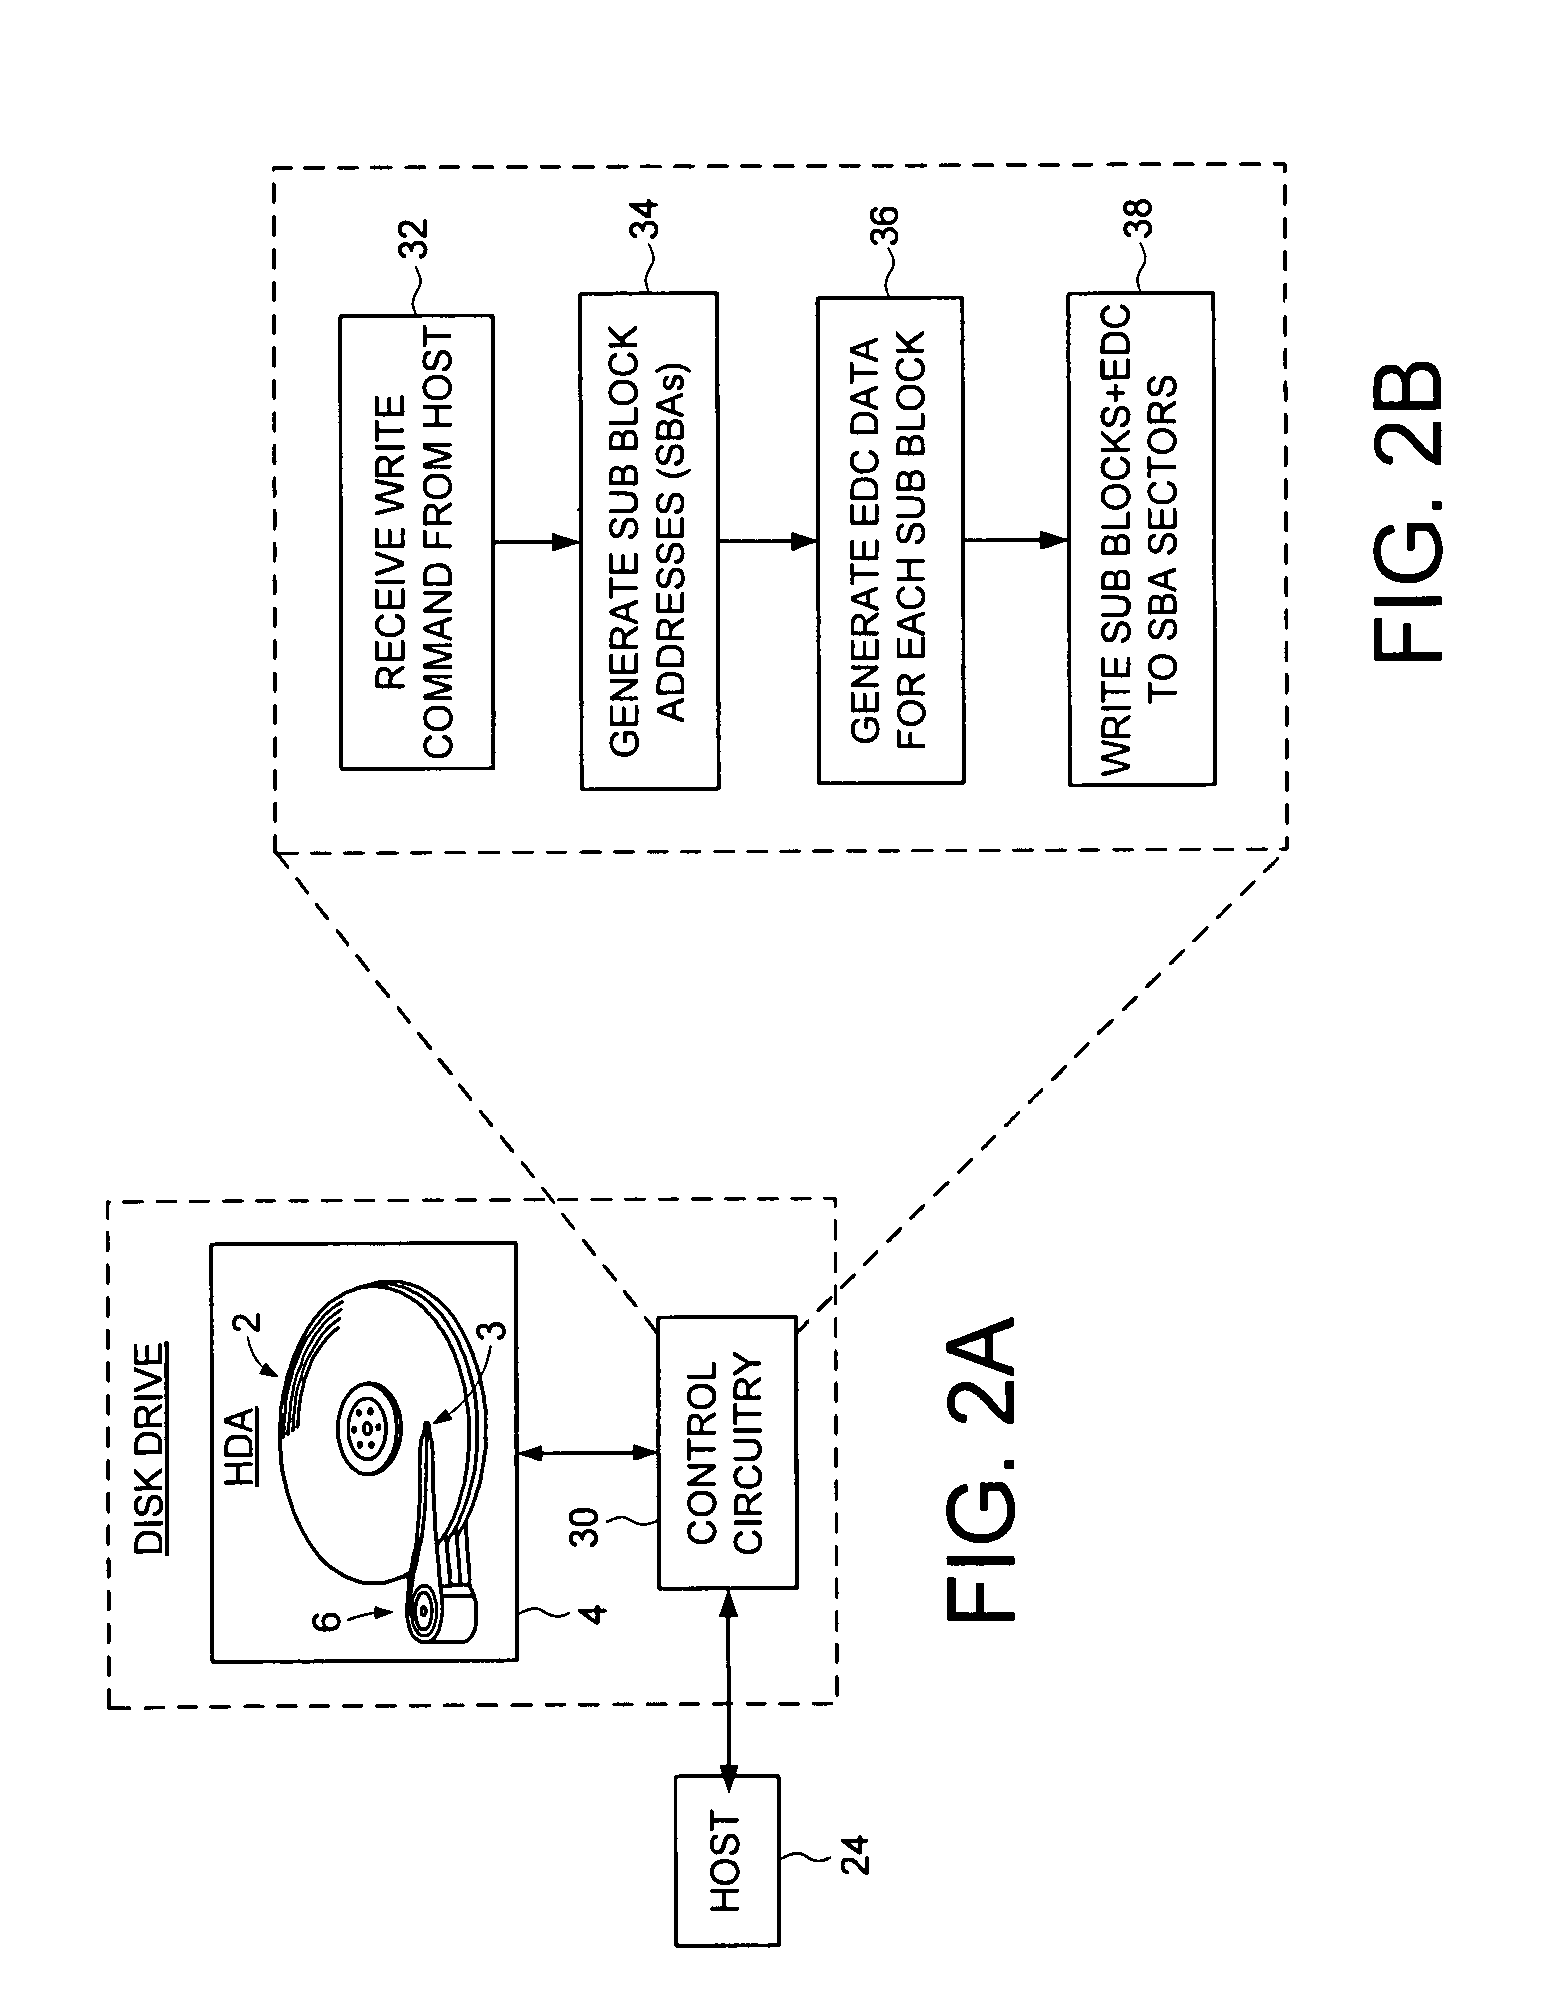 Storage device implementing data path protection by encoding large host blocks into sub blocks